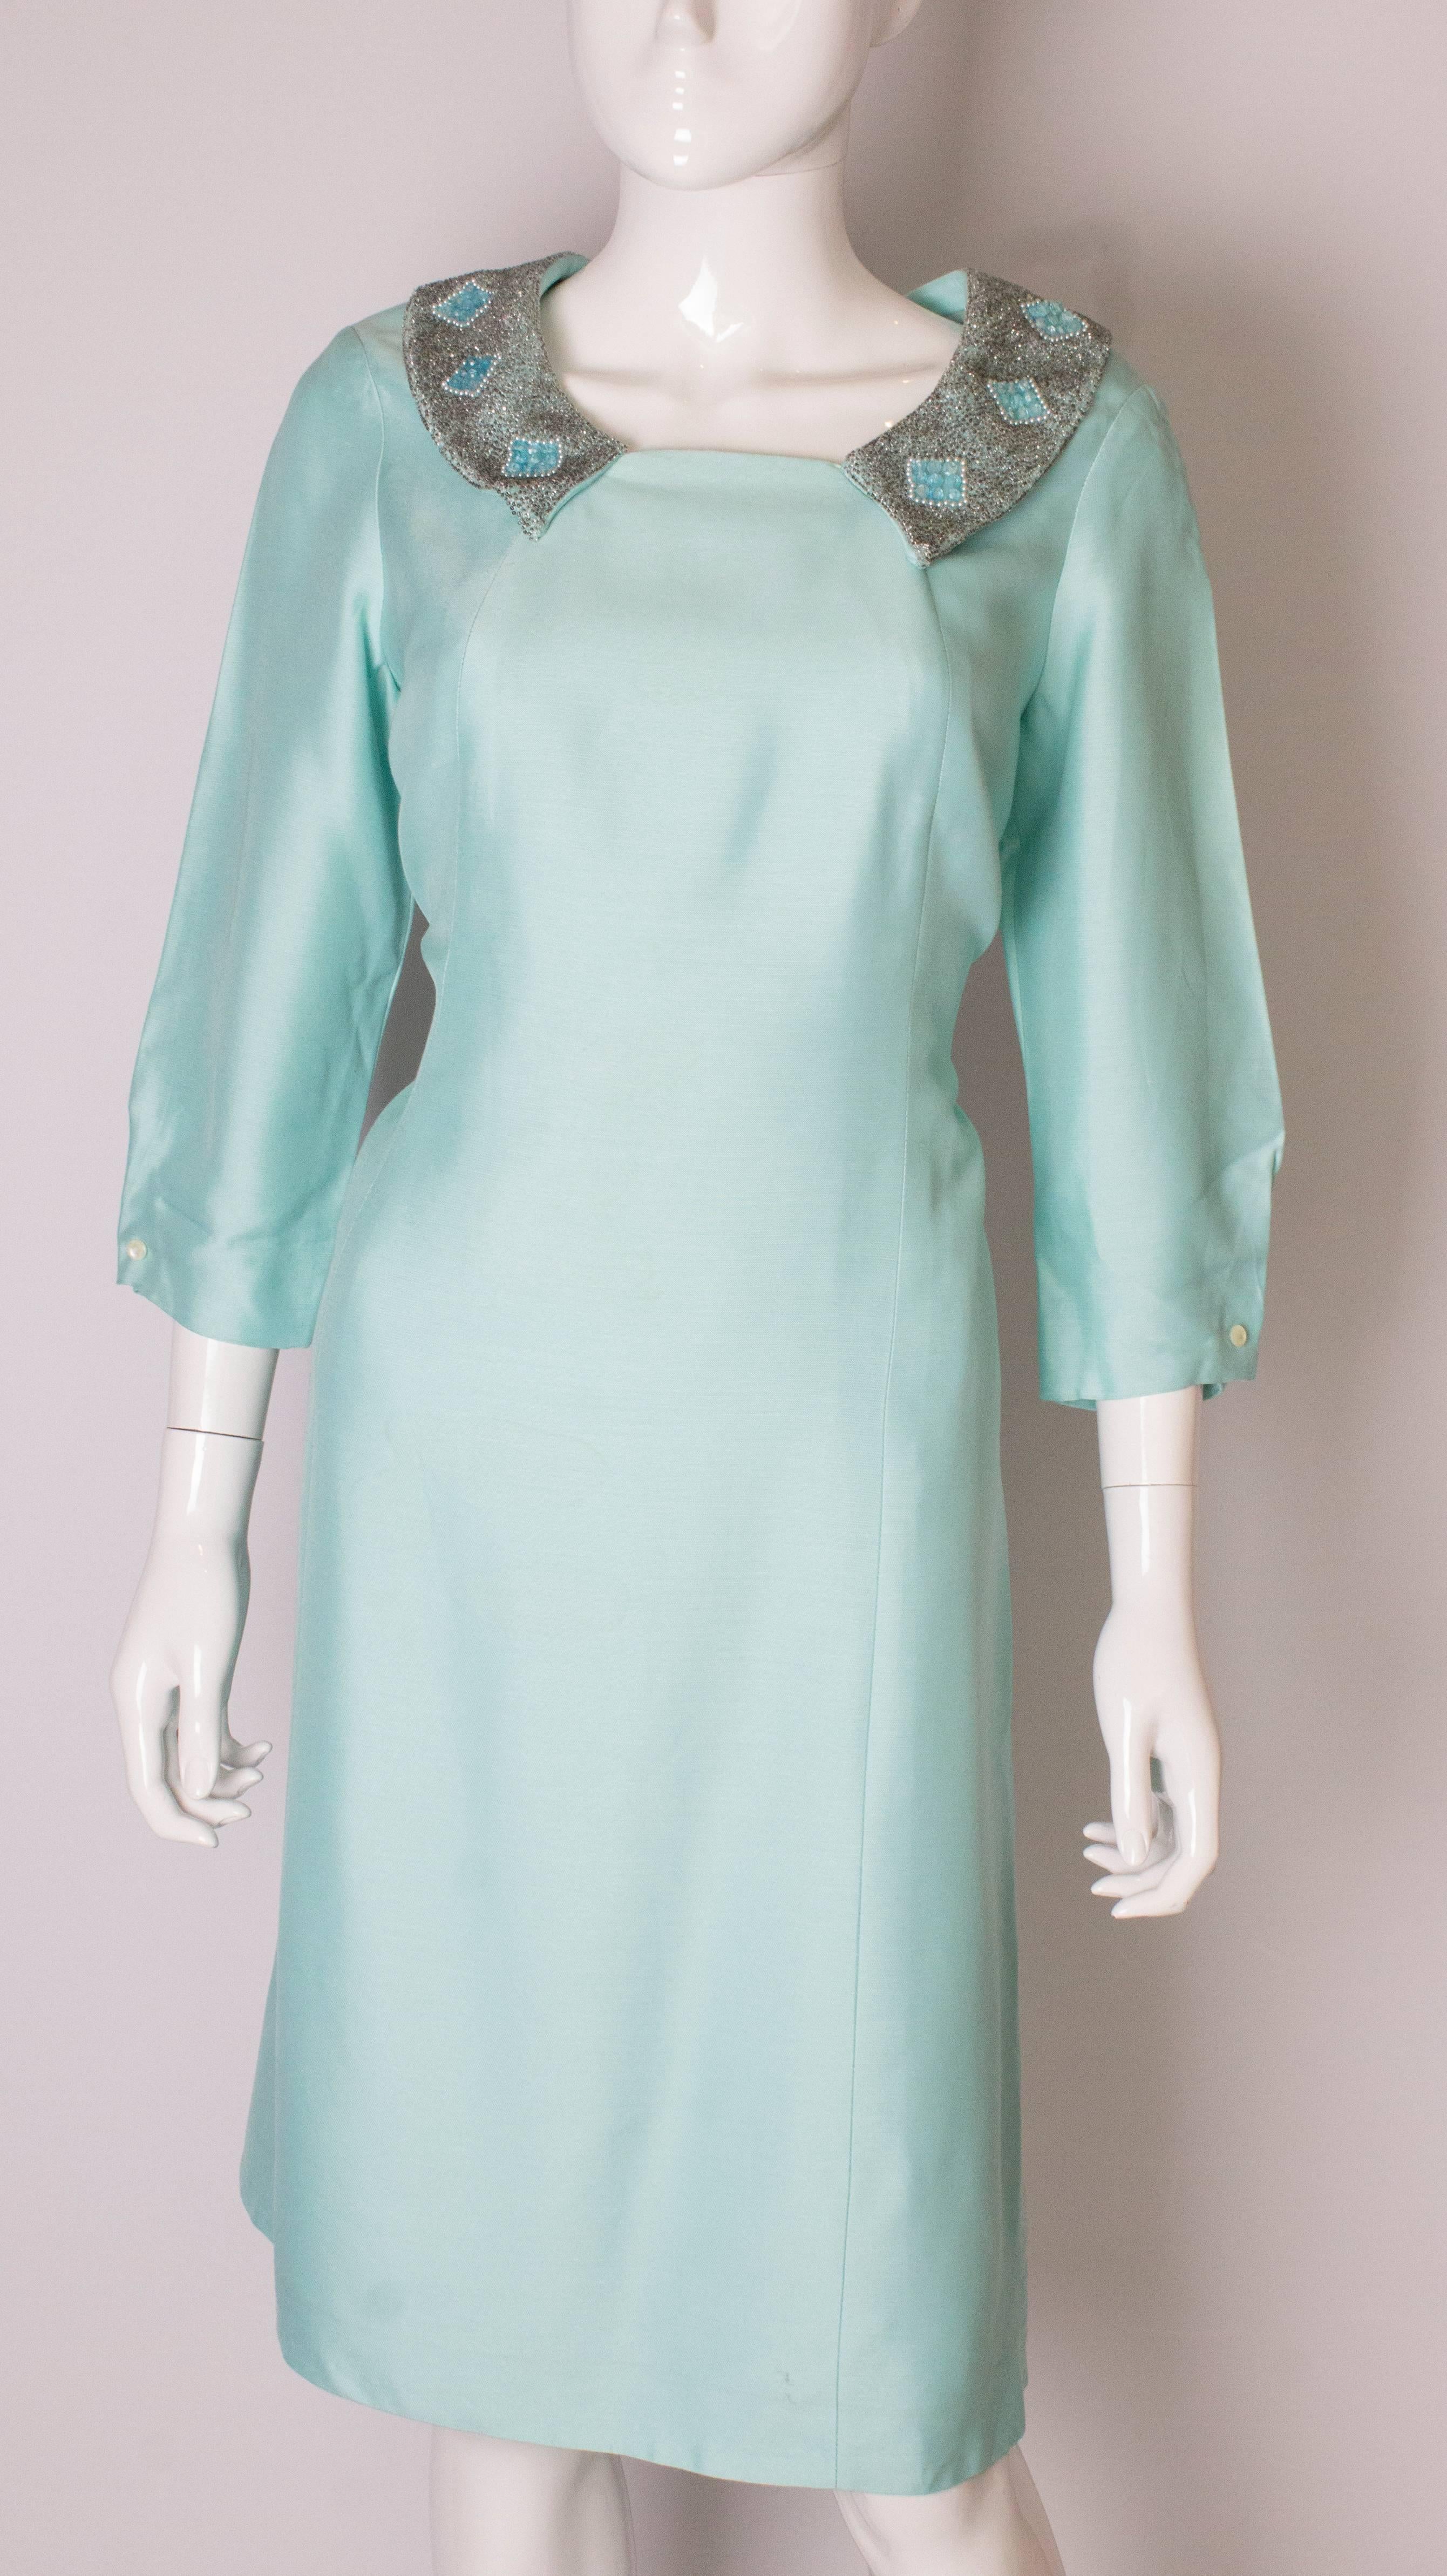 A lovely shift dress by Petite Francaise. In a pretty  pale blue colour the dress has pretty beaded collar and elbow length sleeves. it is fully lined with a central back zip.